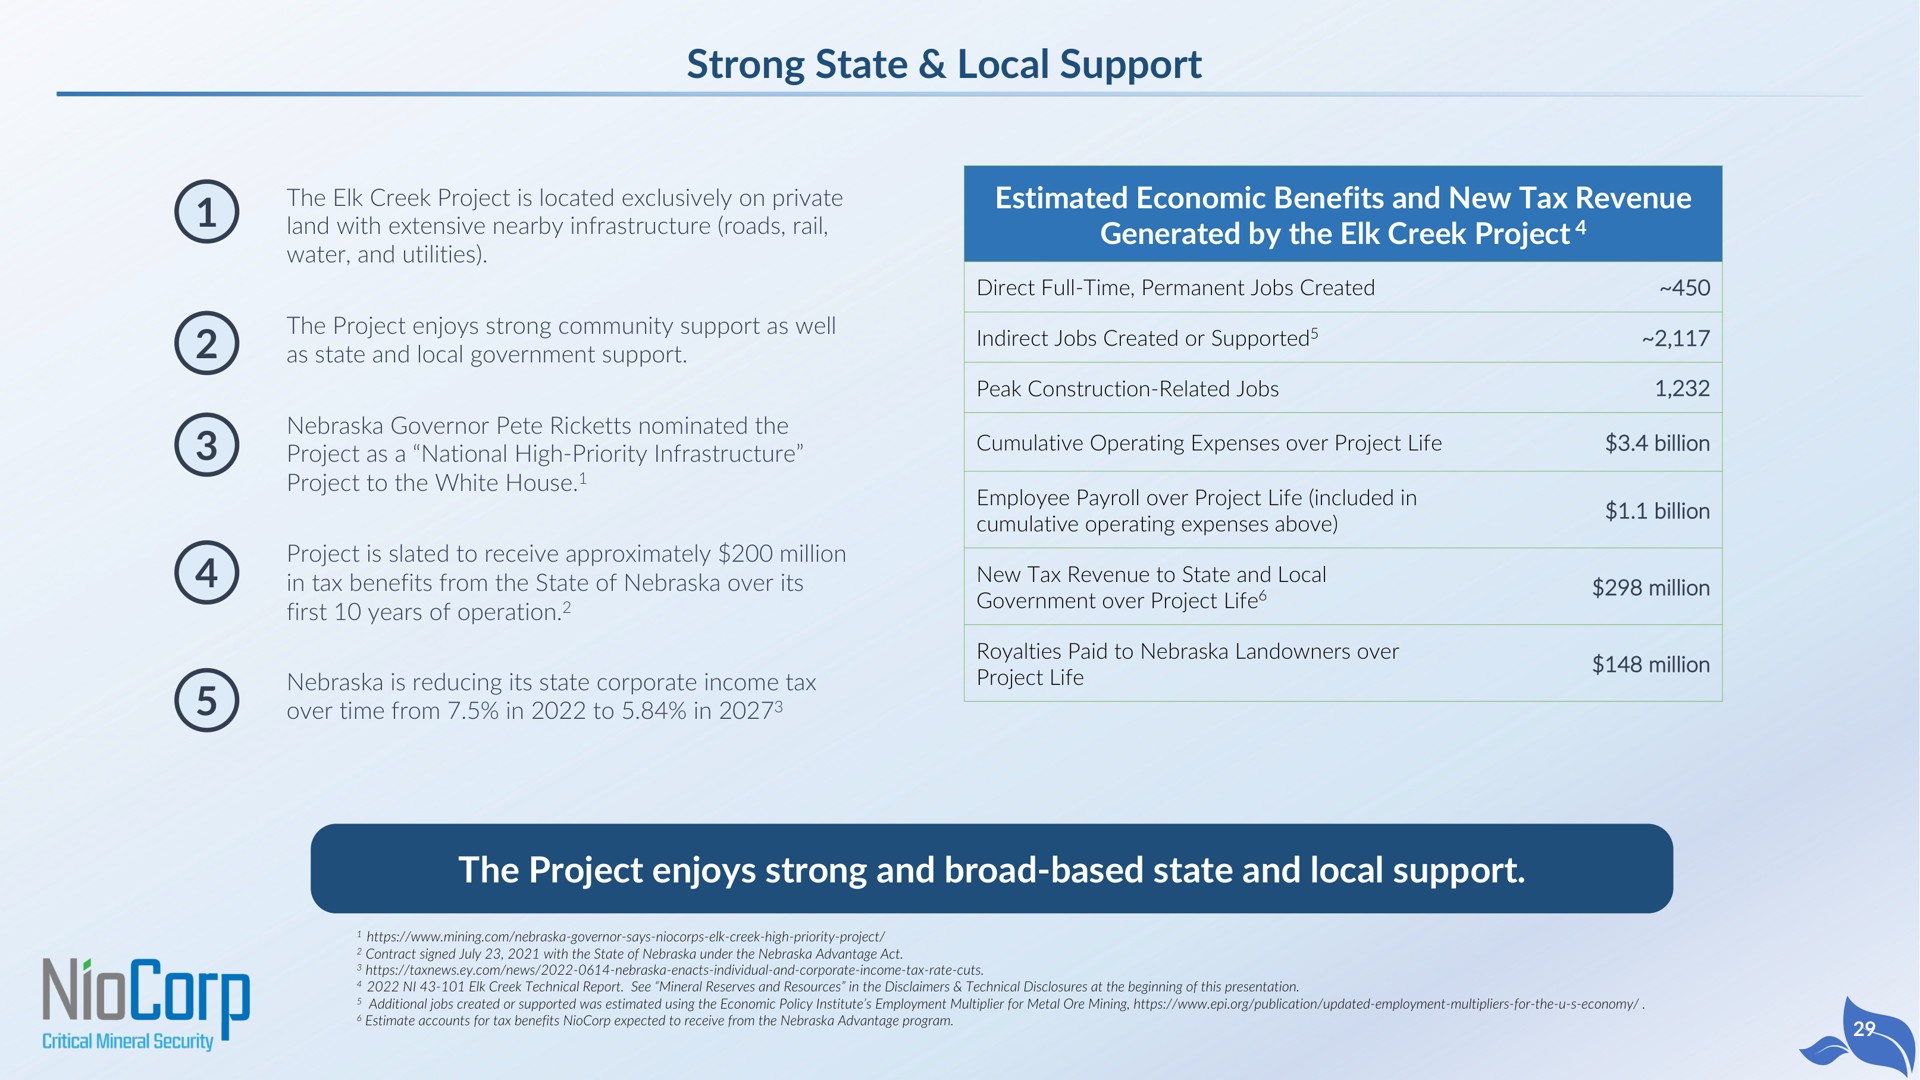 strong state local support estimated economic benefits and new tax revenue generated by the elk creek project the project enjoys strong and broad based state and local support | NioCorp